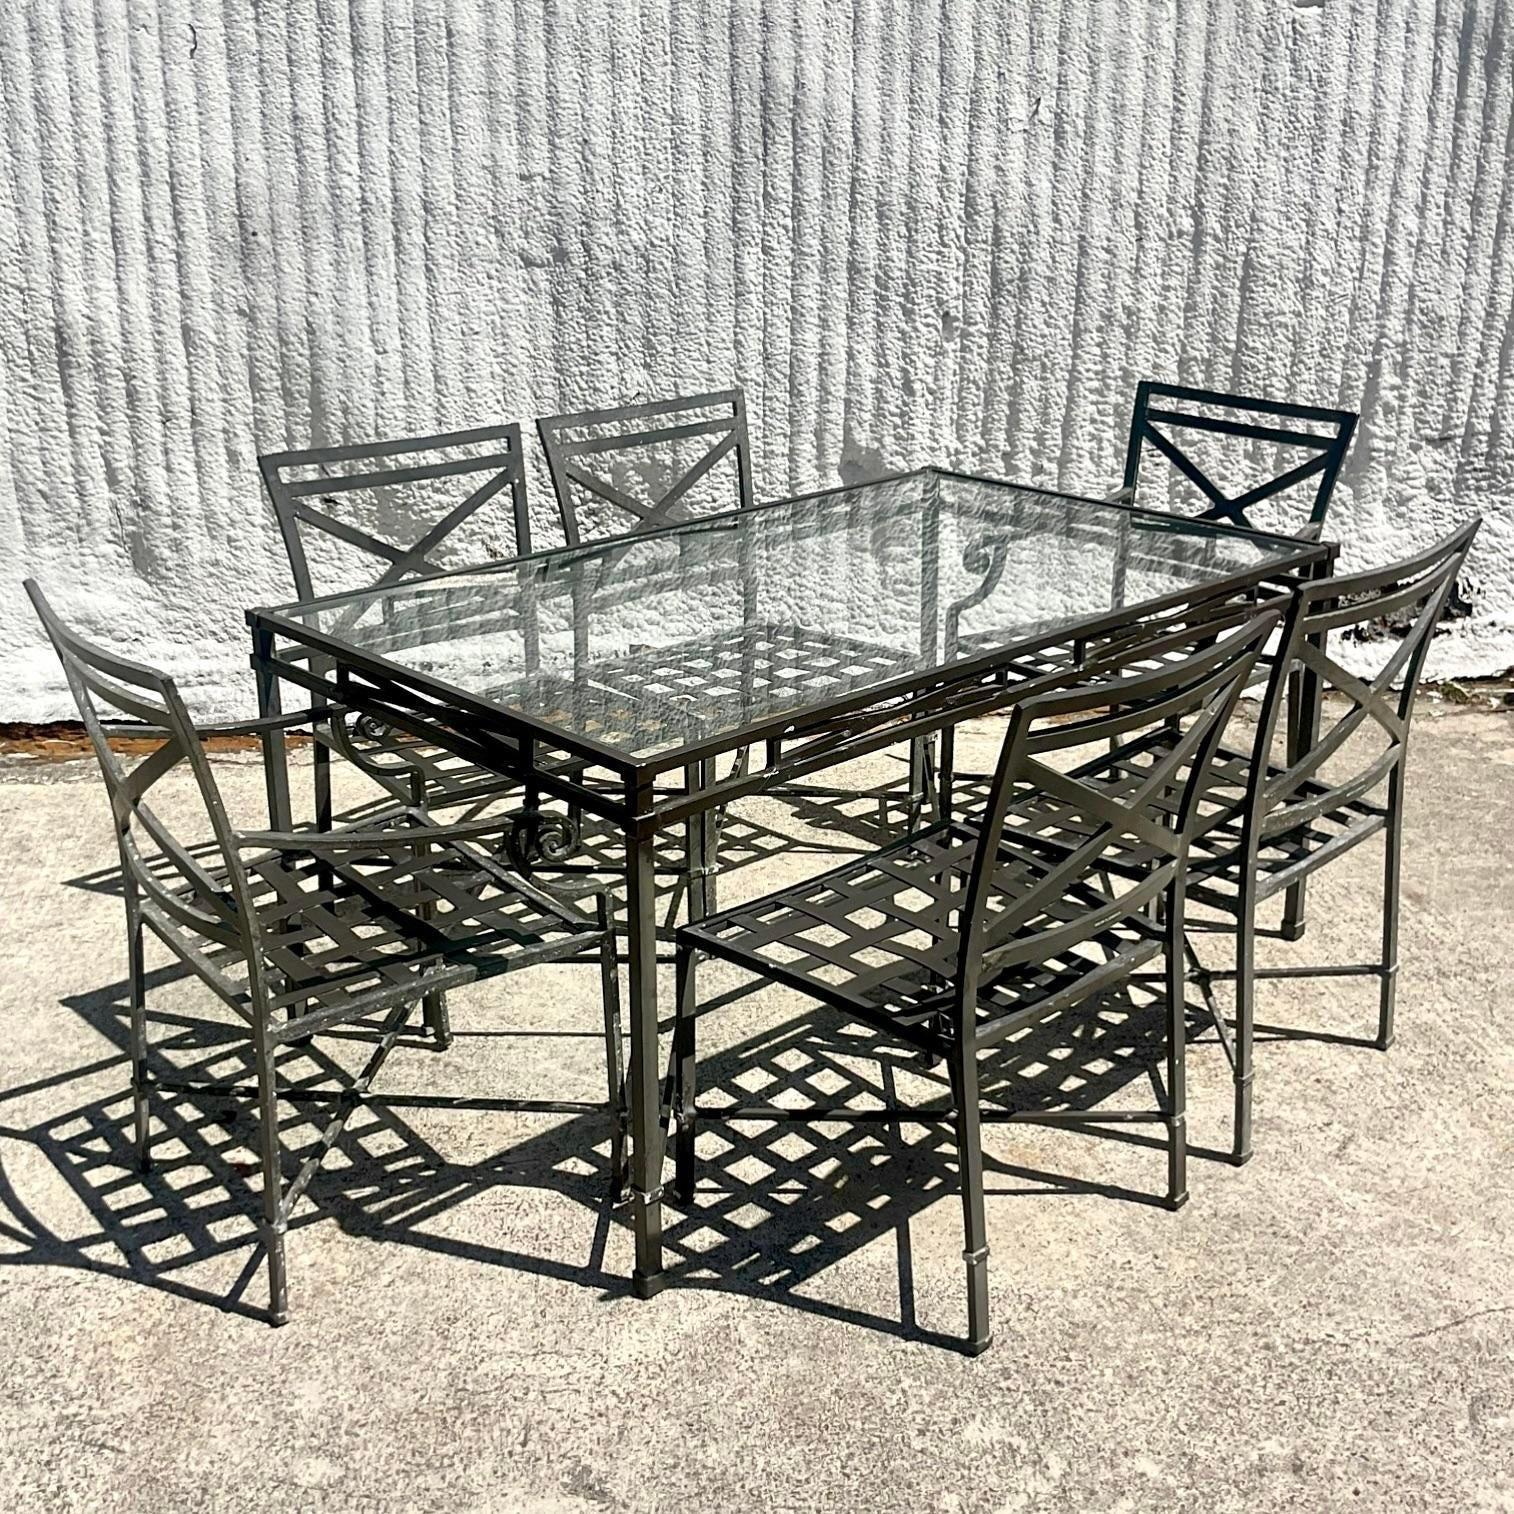 A stunning set of vintage Regency dining table and chairs. Made by the iconic Brown Jordan. Part of their highly coveted “Venetian” collection. Six chairs, 2 arms and four sides, with matching table. Acquired from a Palm Beach estate.

Measures: